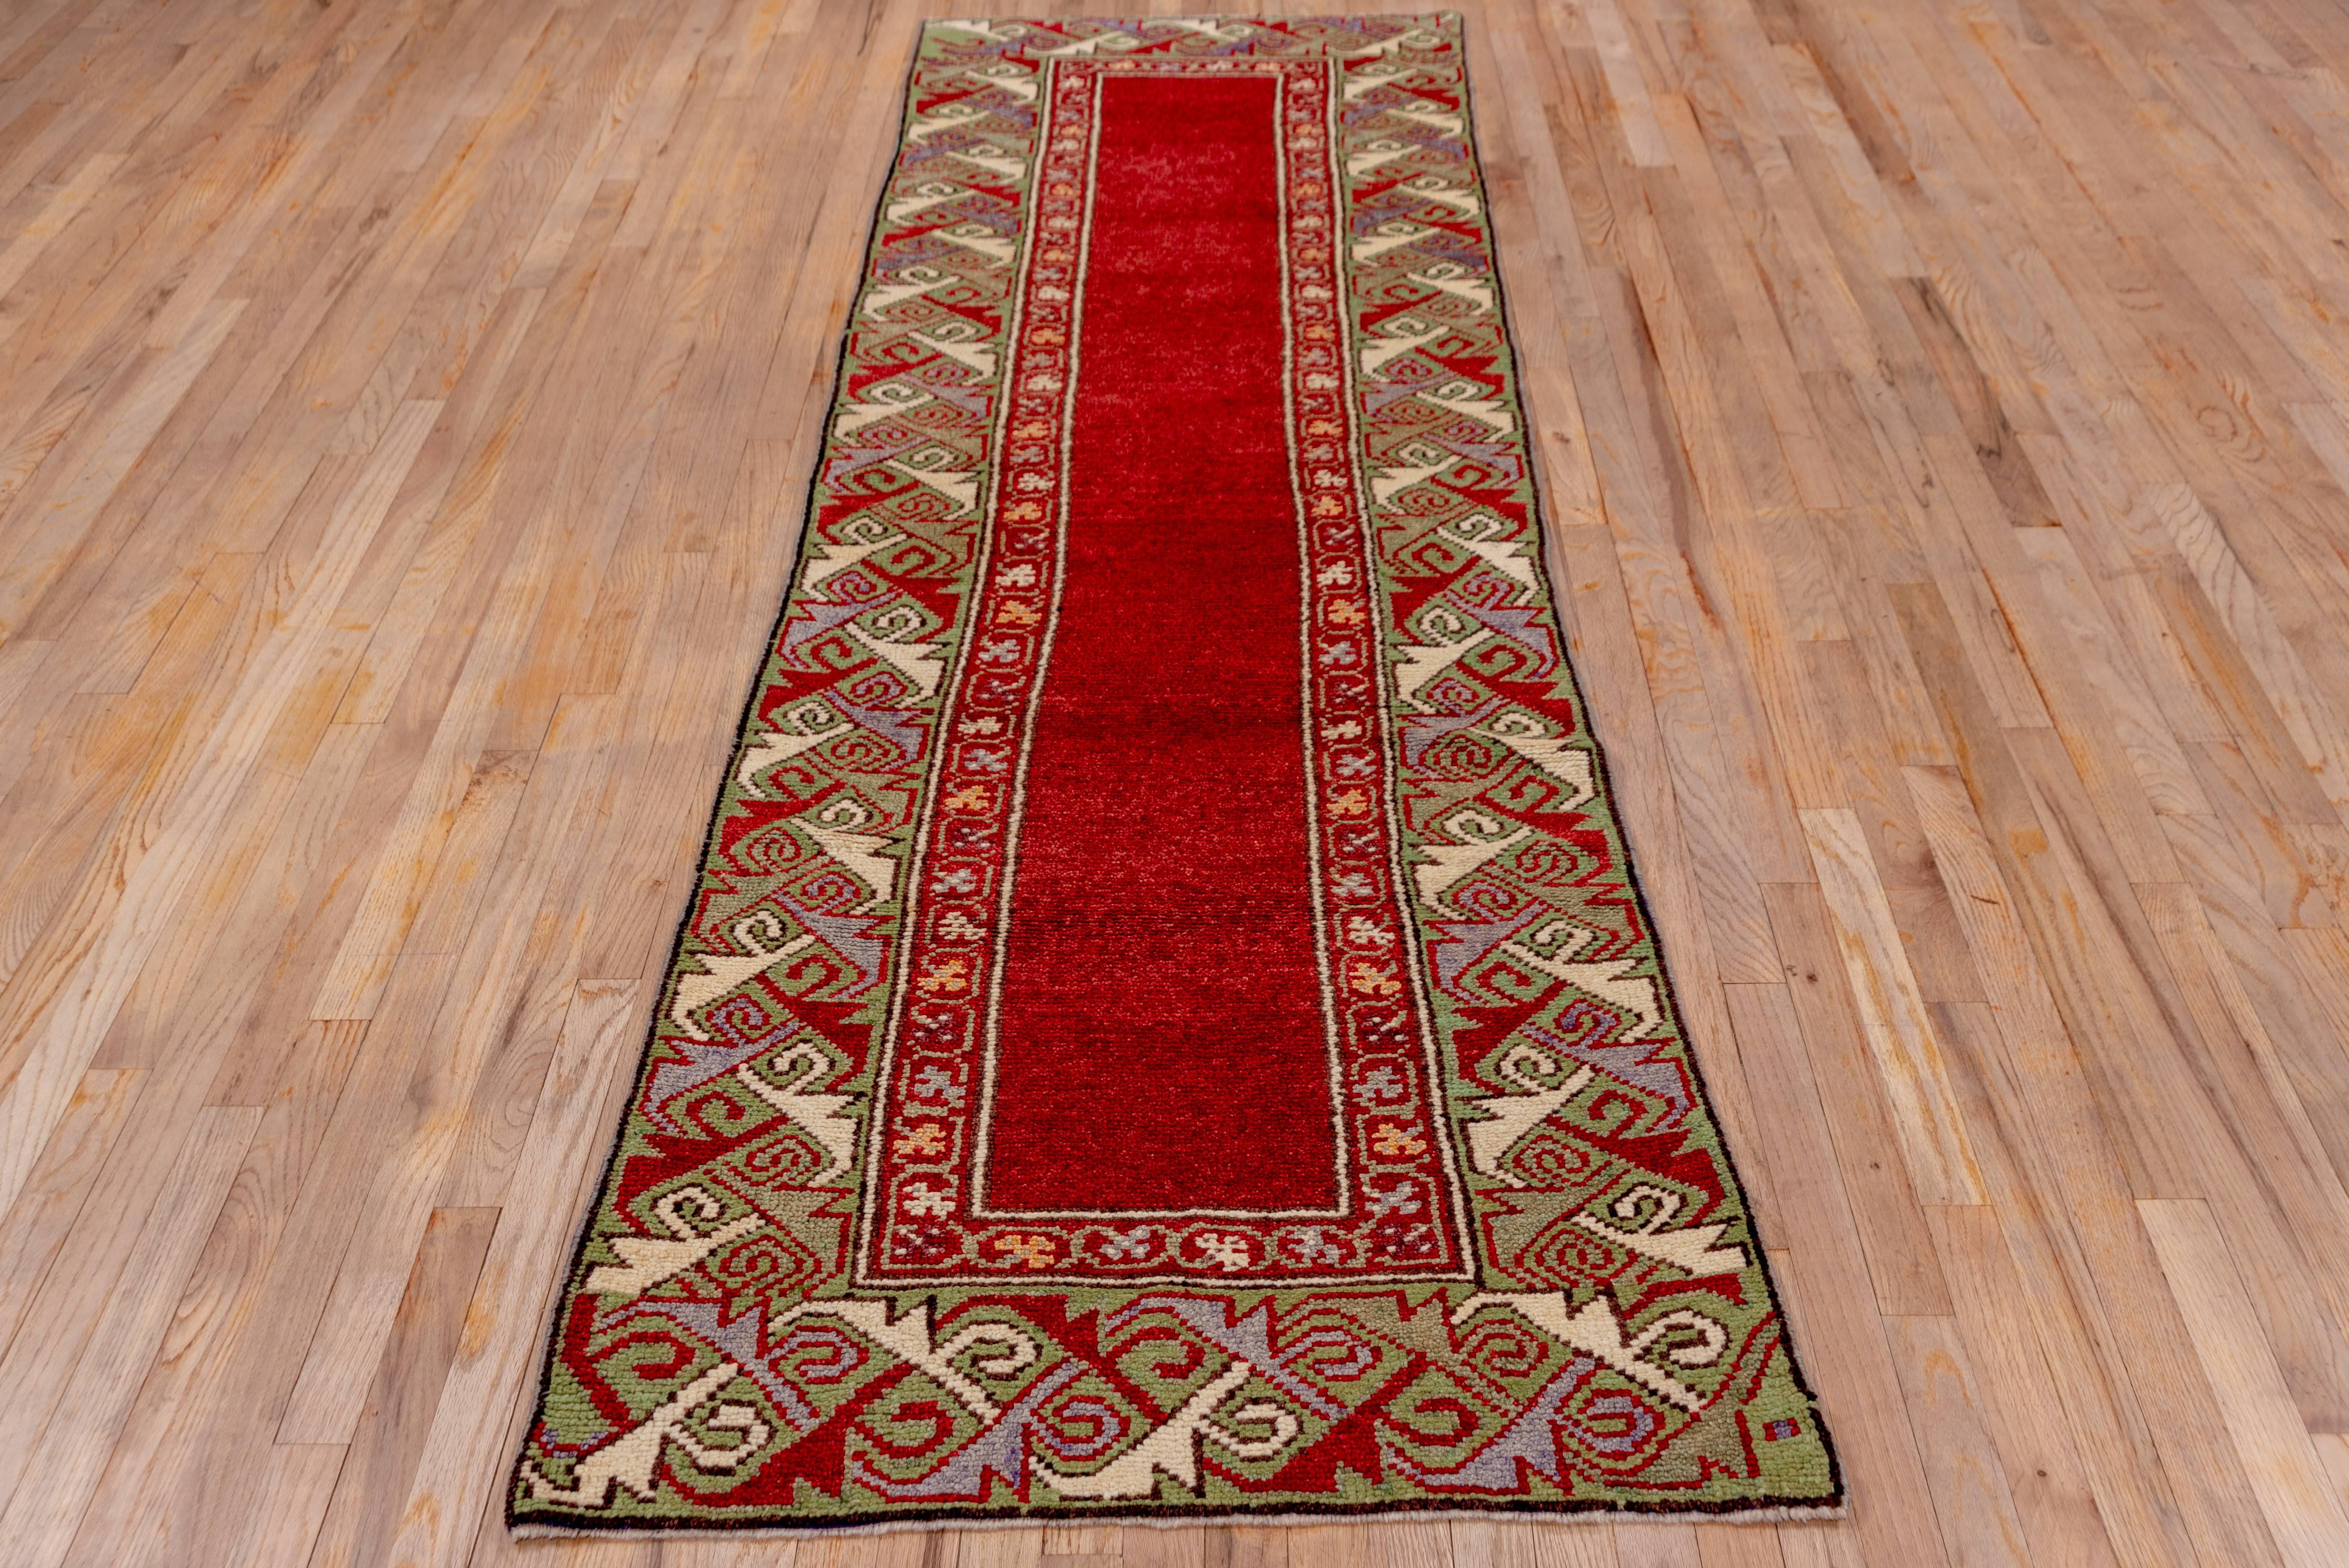 This extremely high pule, top condition eastern Anatolian runner has a plain mid-red field framed by a broad camel dragon border in the Caucasian style. Also Caucasian is the red inner border with a three leaf clover Meander. The ivory in the border